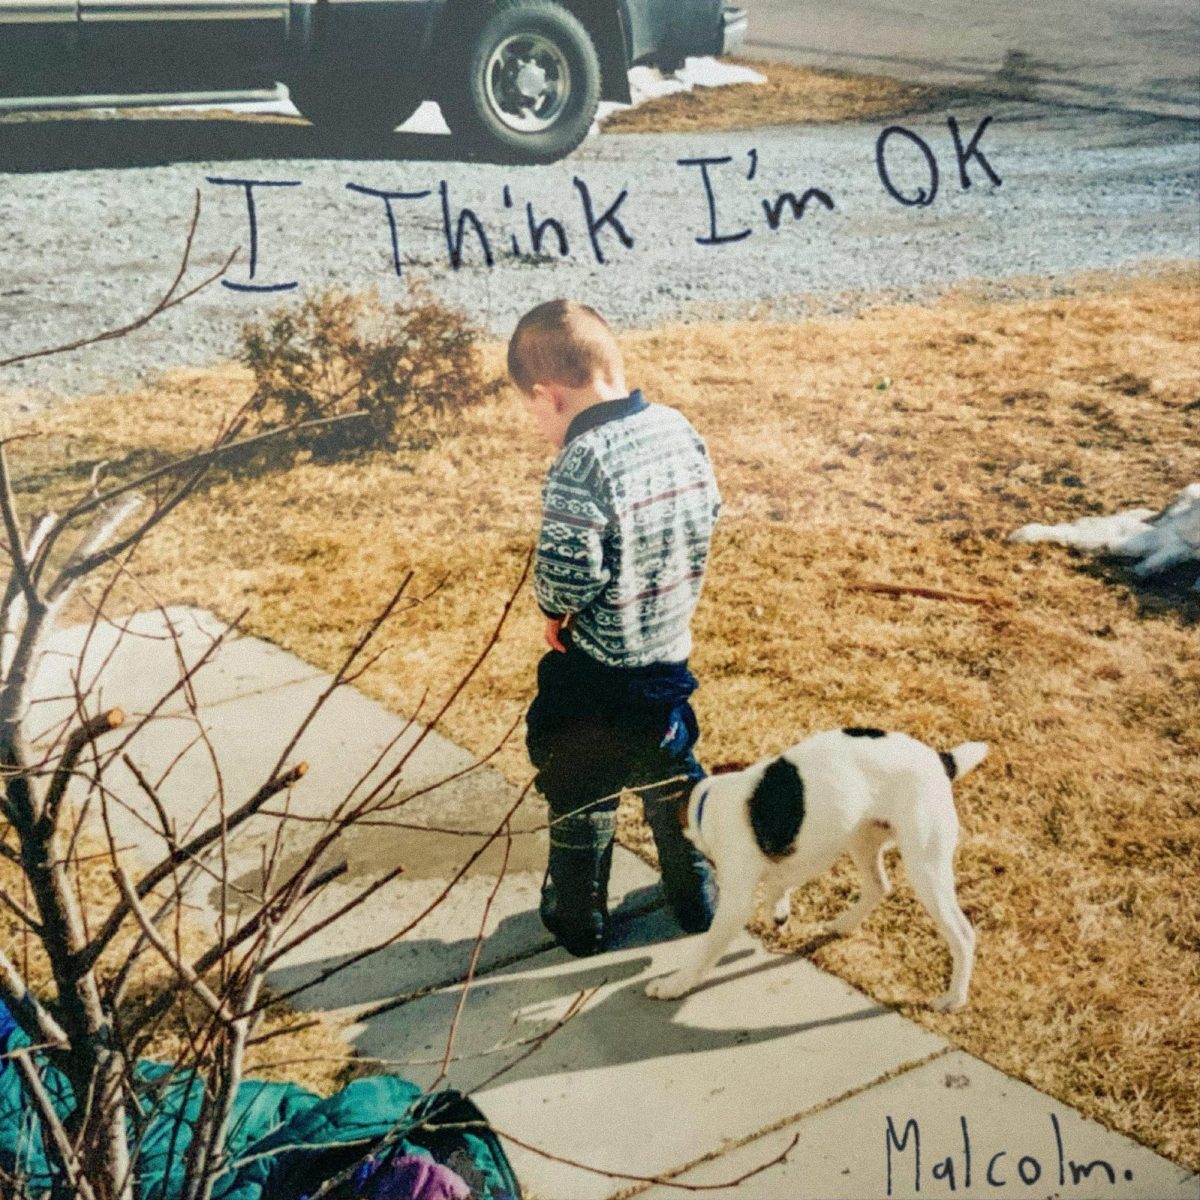 How Summer is Going So Far | “I Think I’m Ok” by Malcolm.